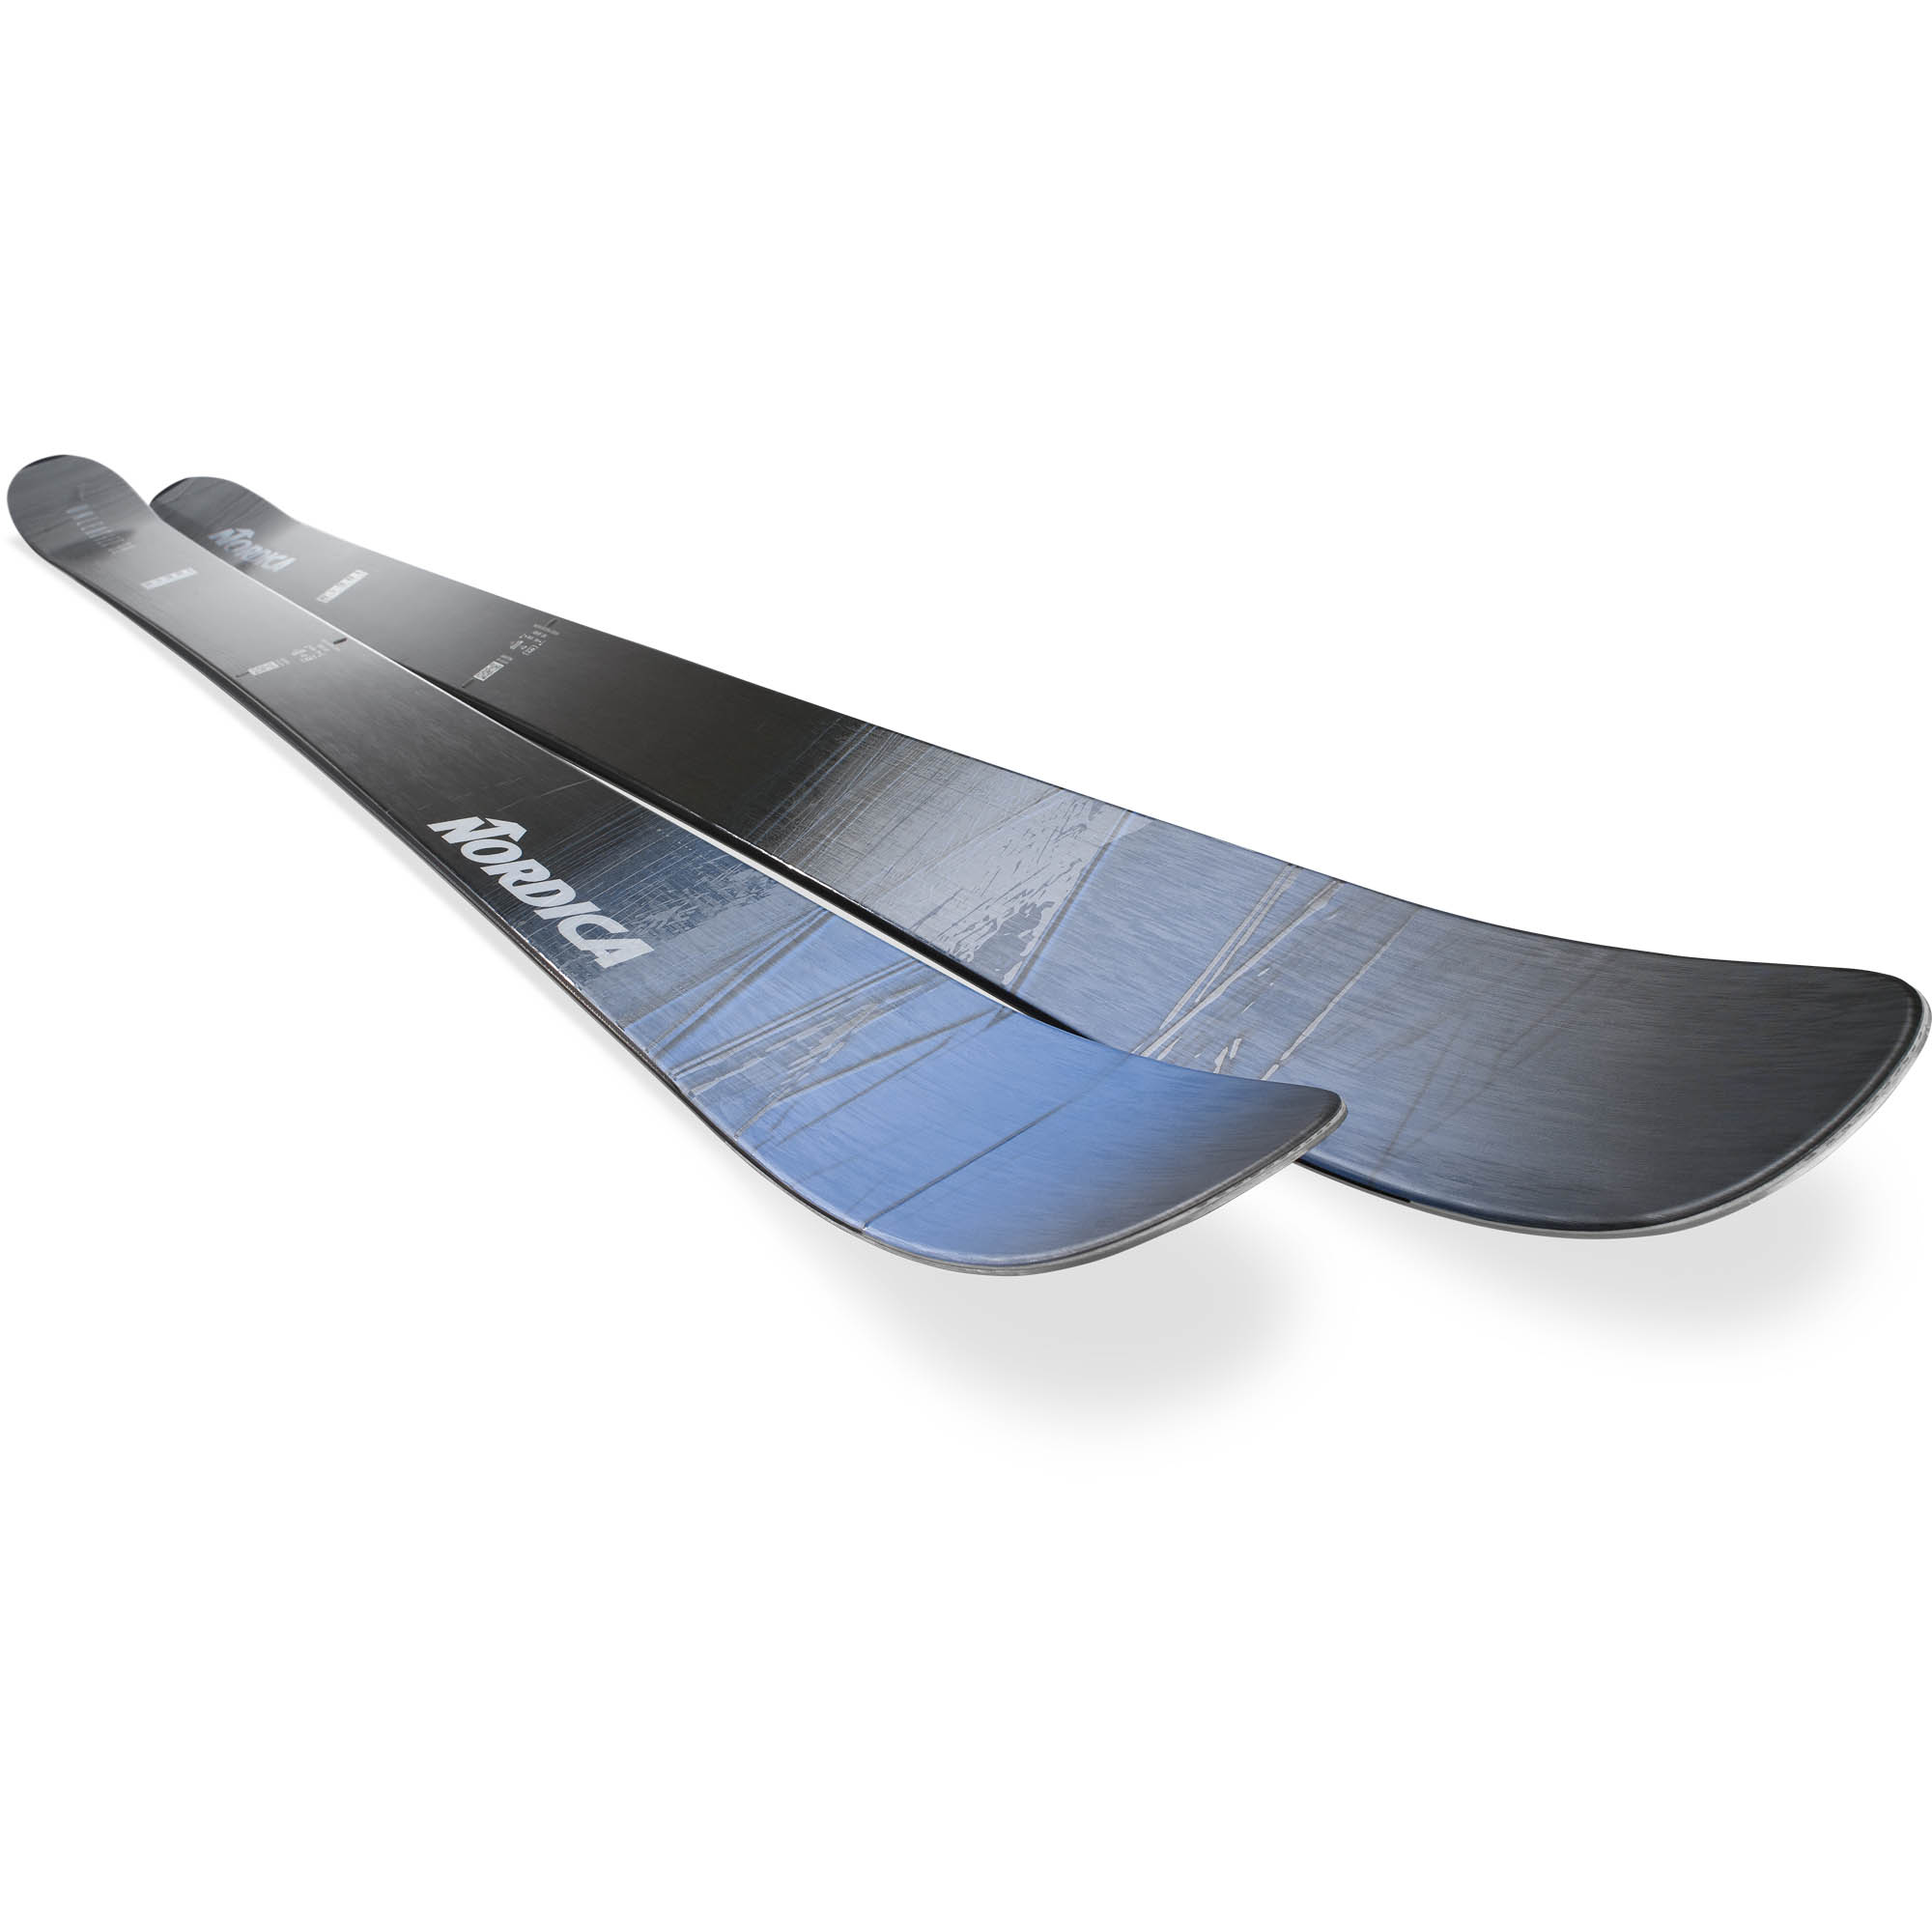 Nordica Unleashed 98 Flat Skis